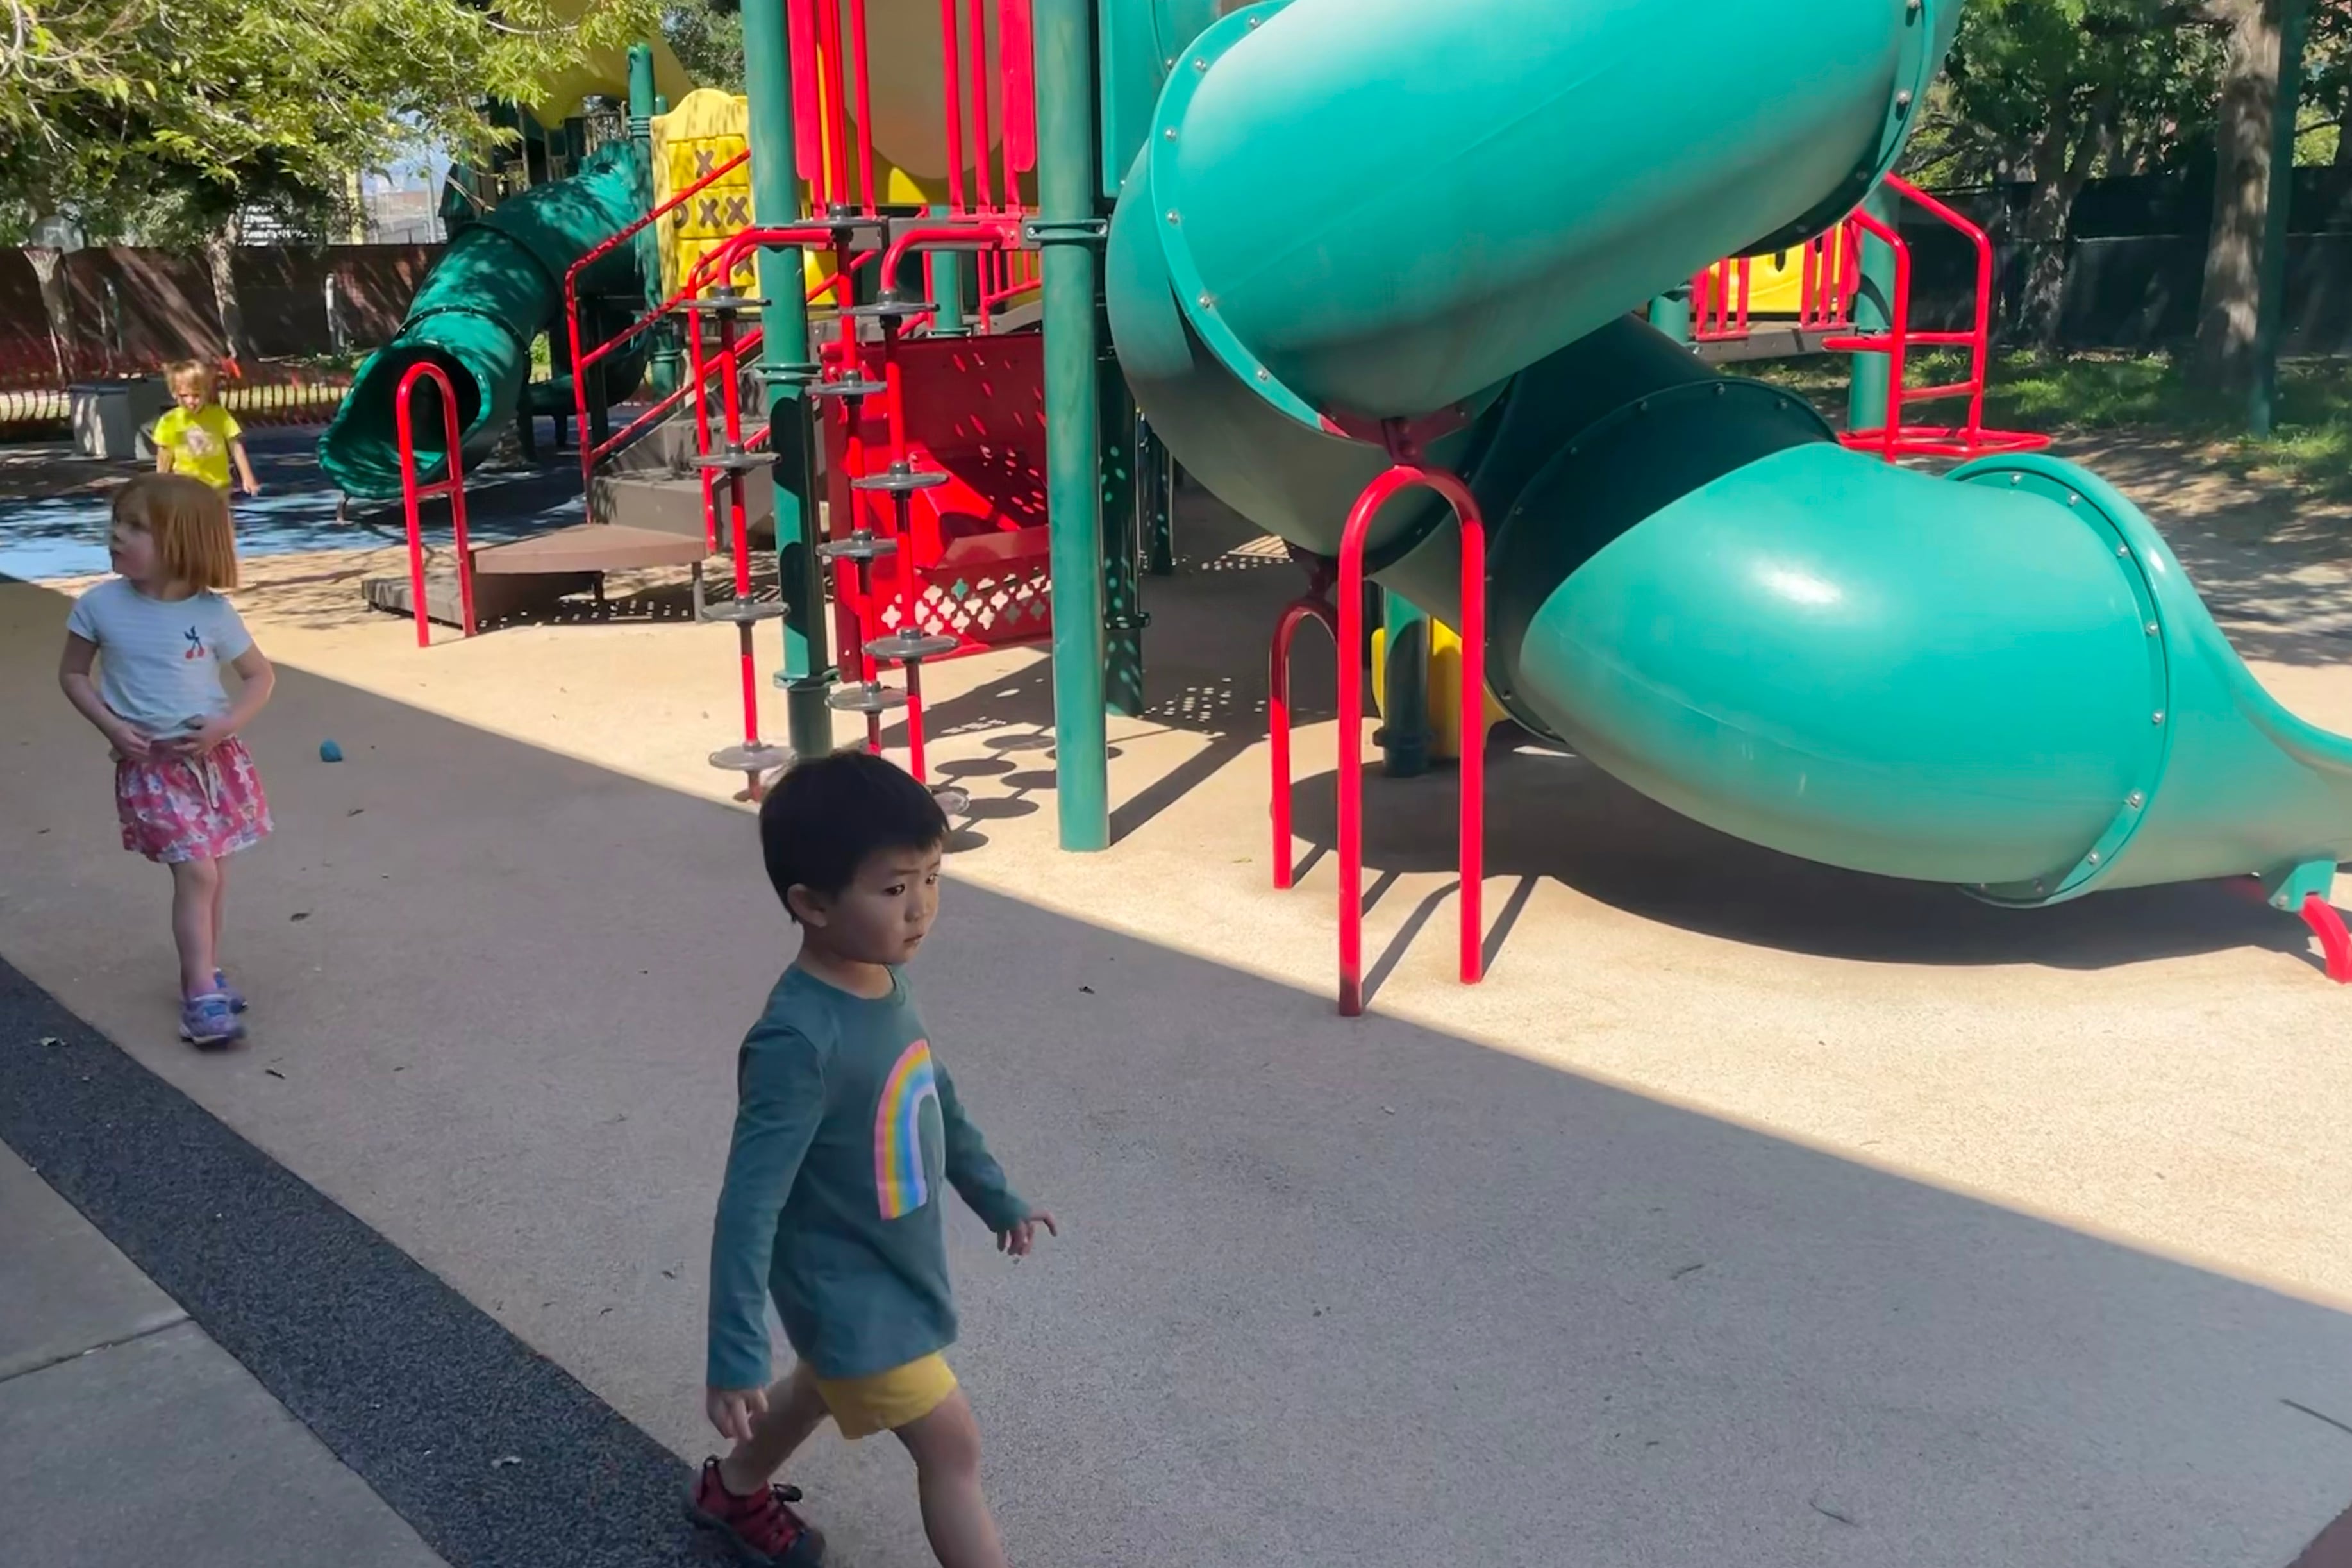 A preschool boy with a rainbow on his shirt walks past a green and red outdoor play structure.